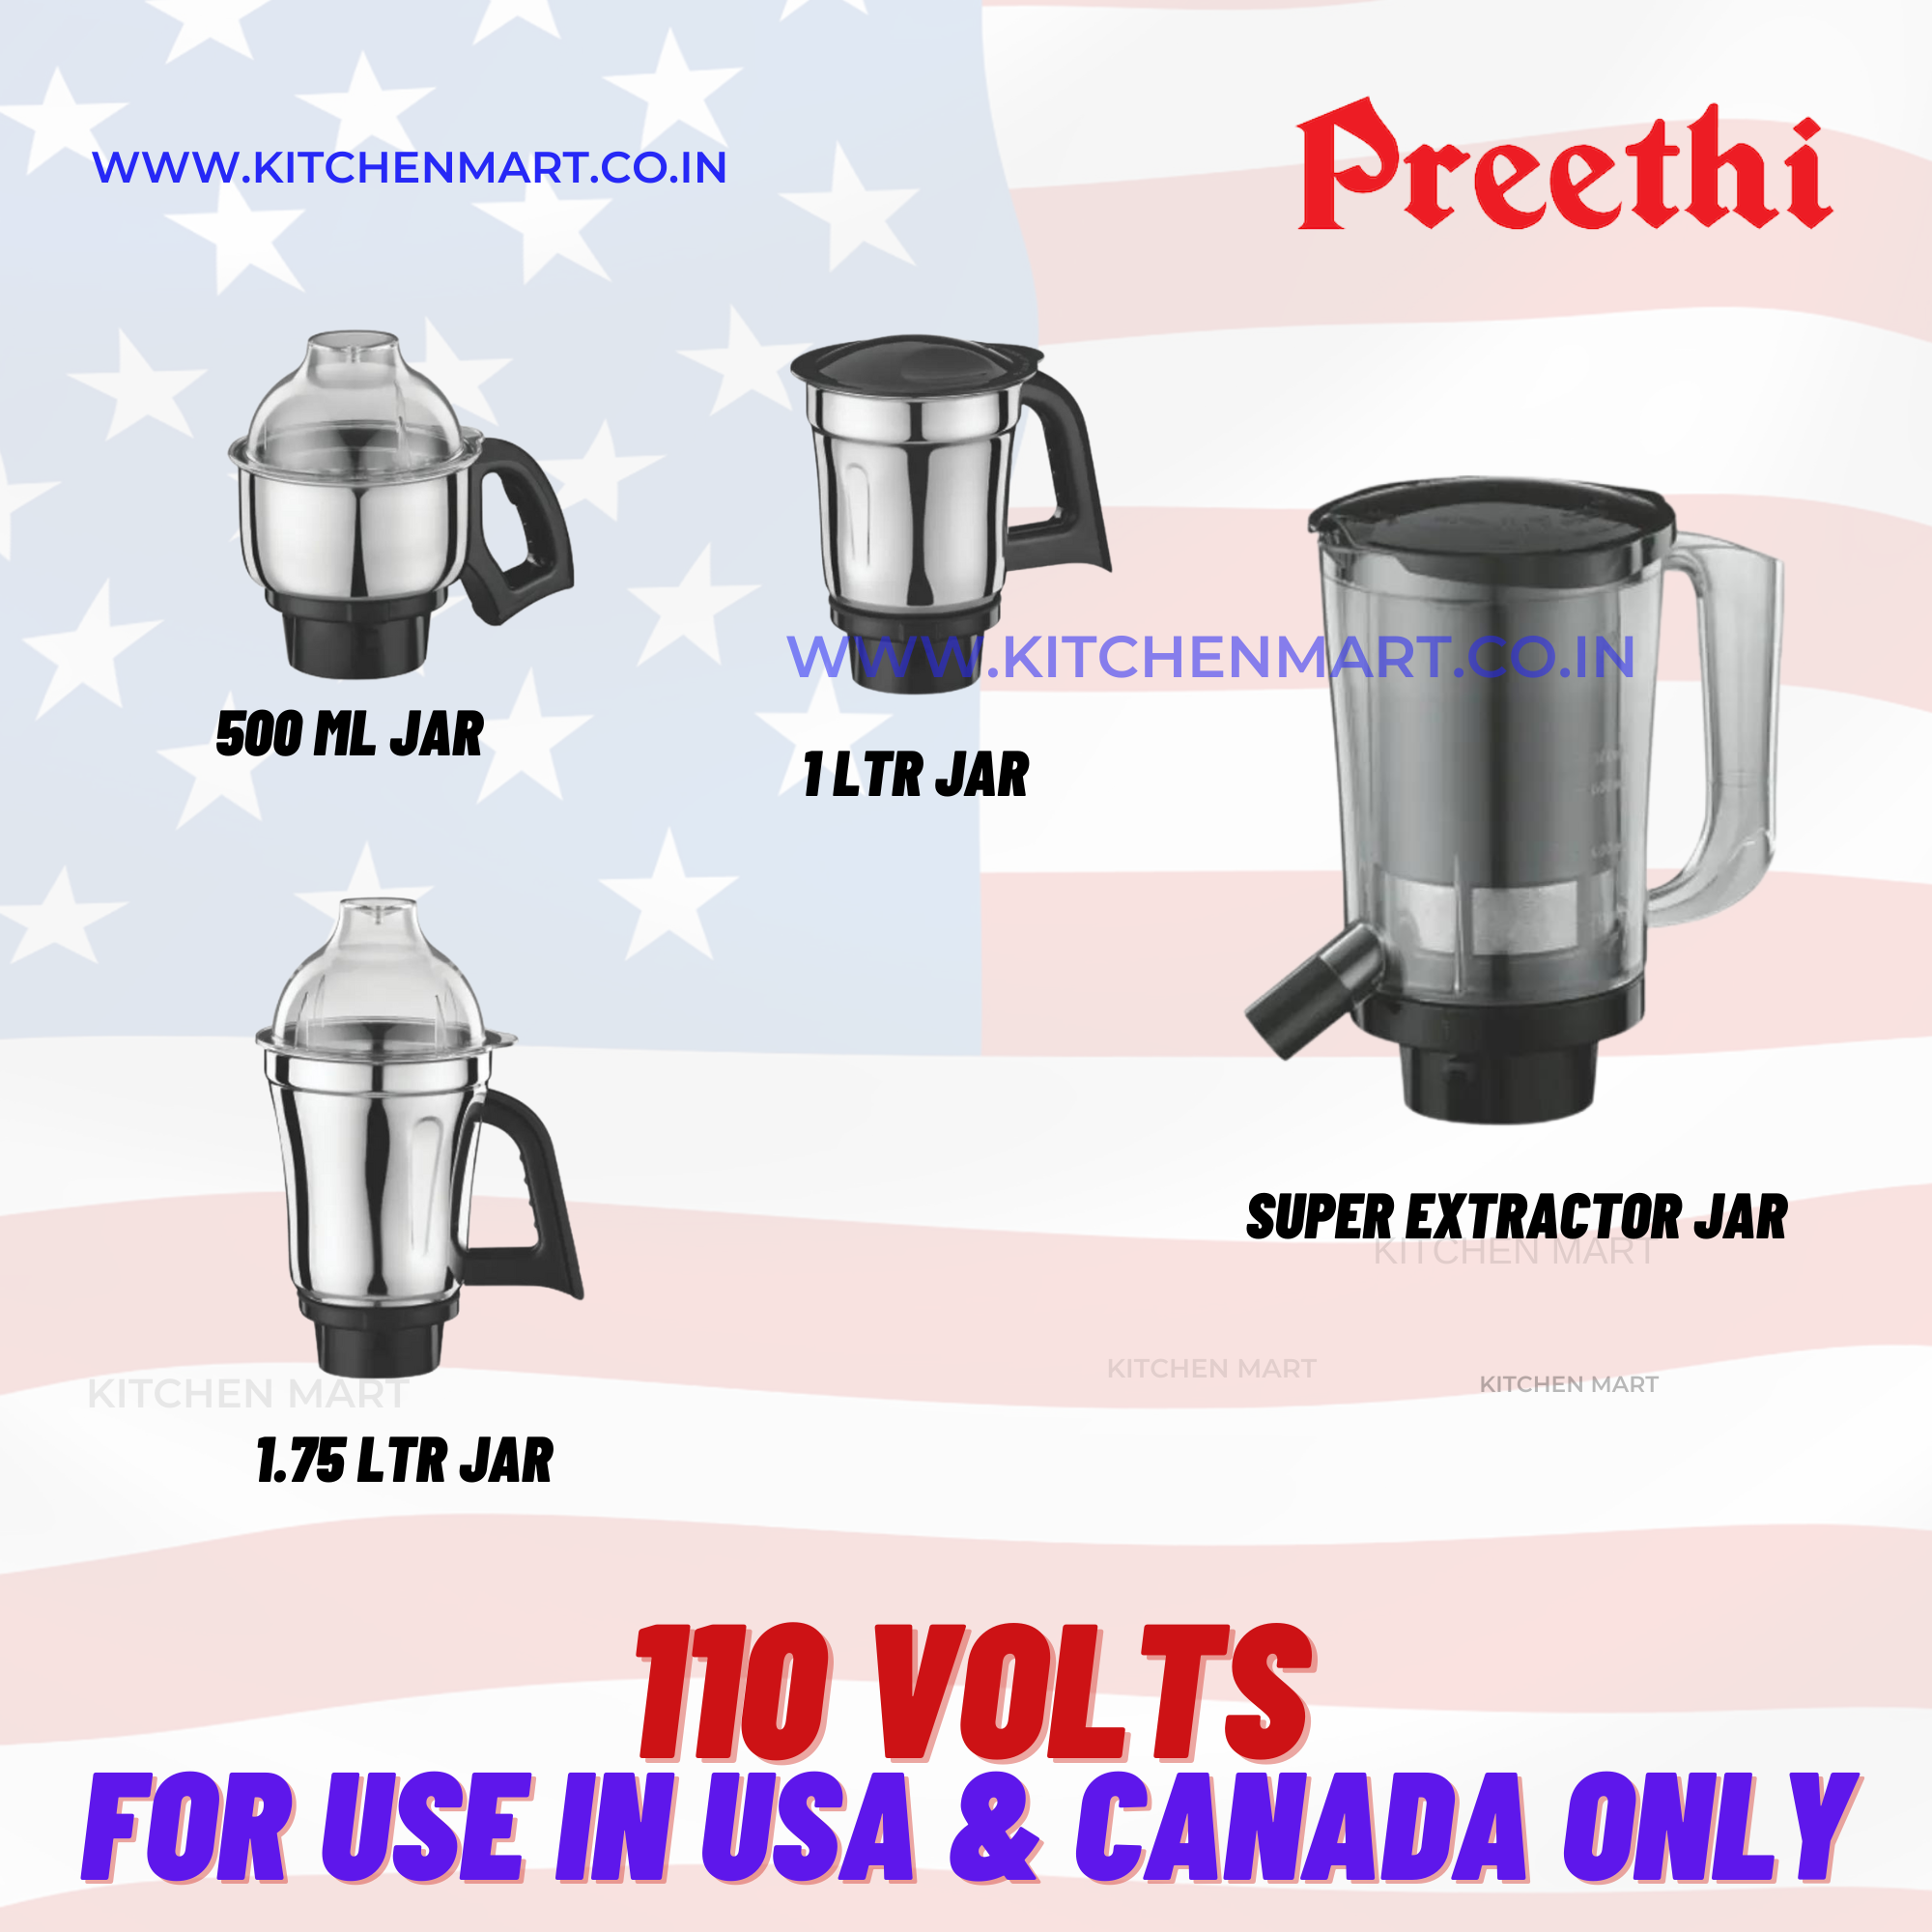 Preethi Zodiac BLACK  550-Watt Mixer Grinder with 5 Jars (110 Volts for use in USA & Canada only)